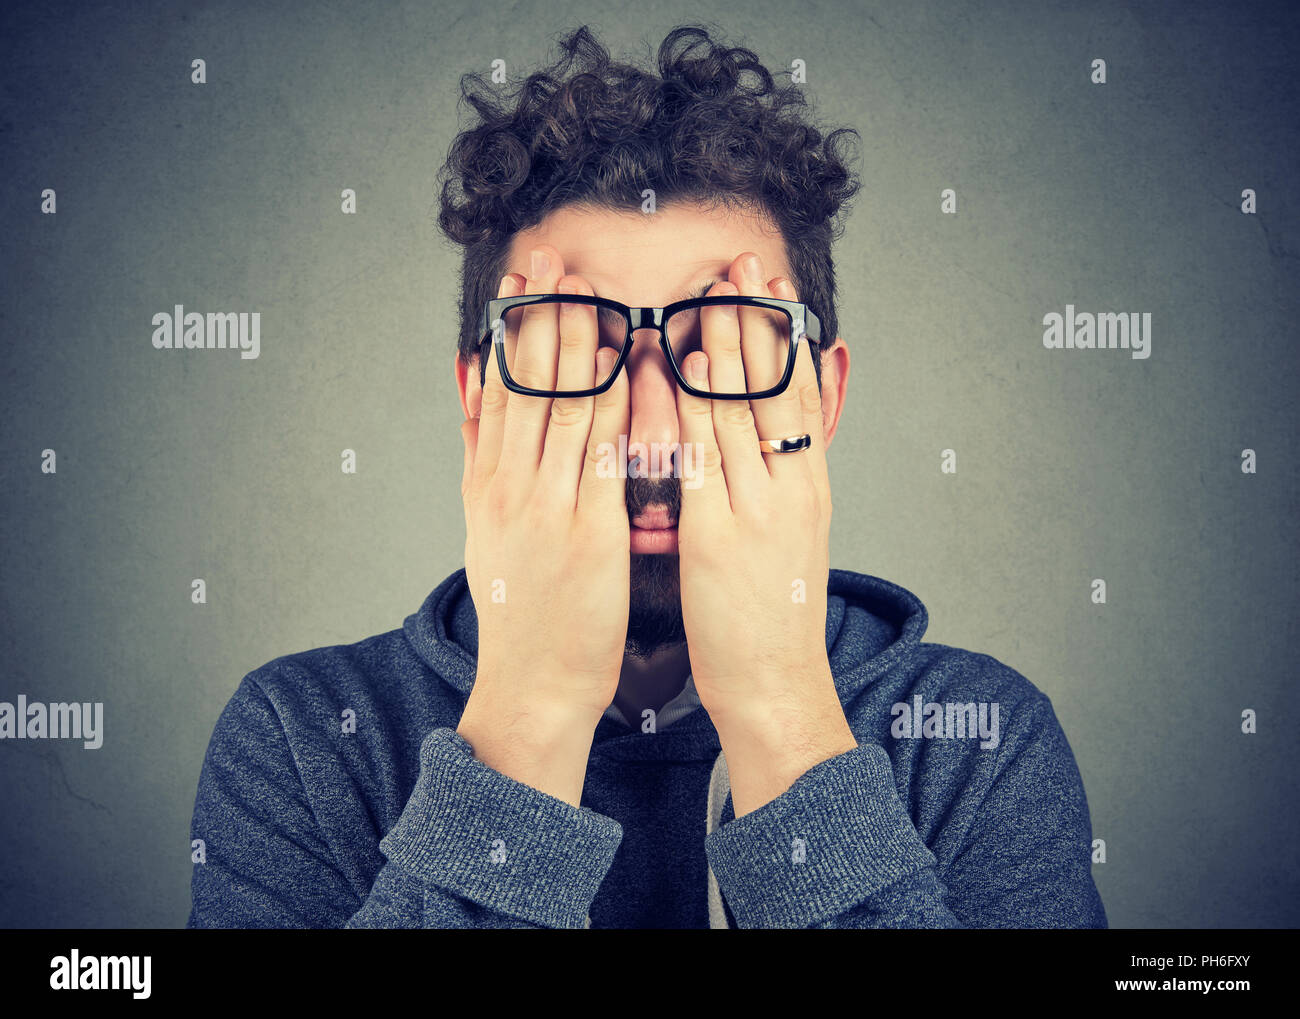 Closeup portrait young man in glasses covering face eyes with both hands isolated on gray wall background Stock Photo